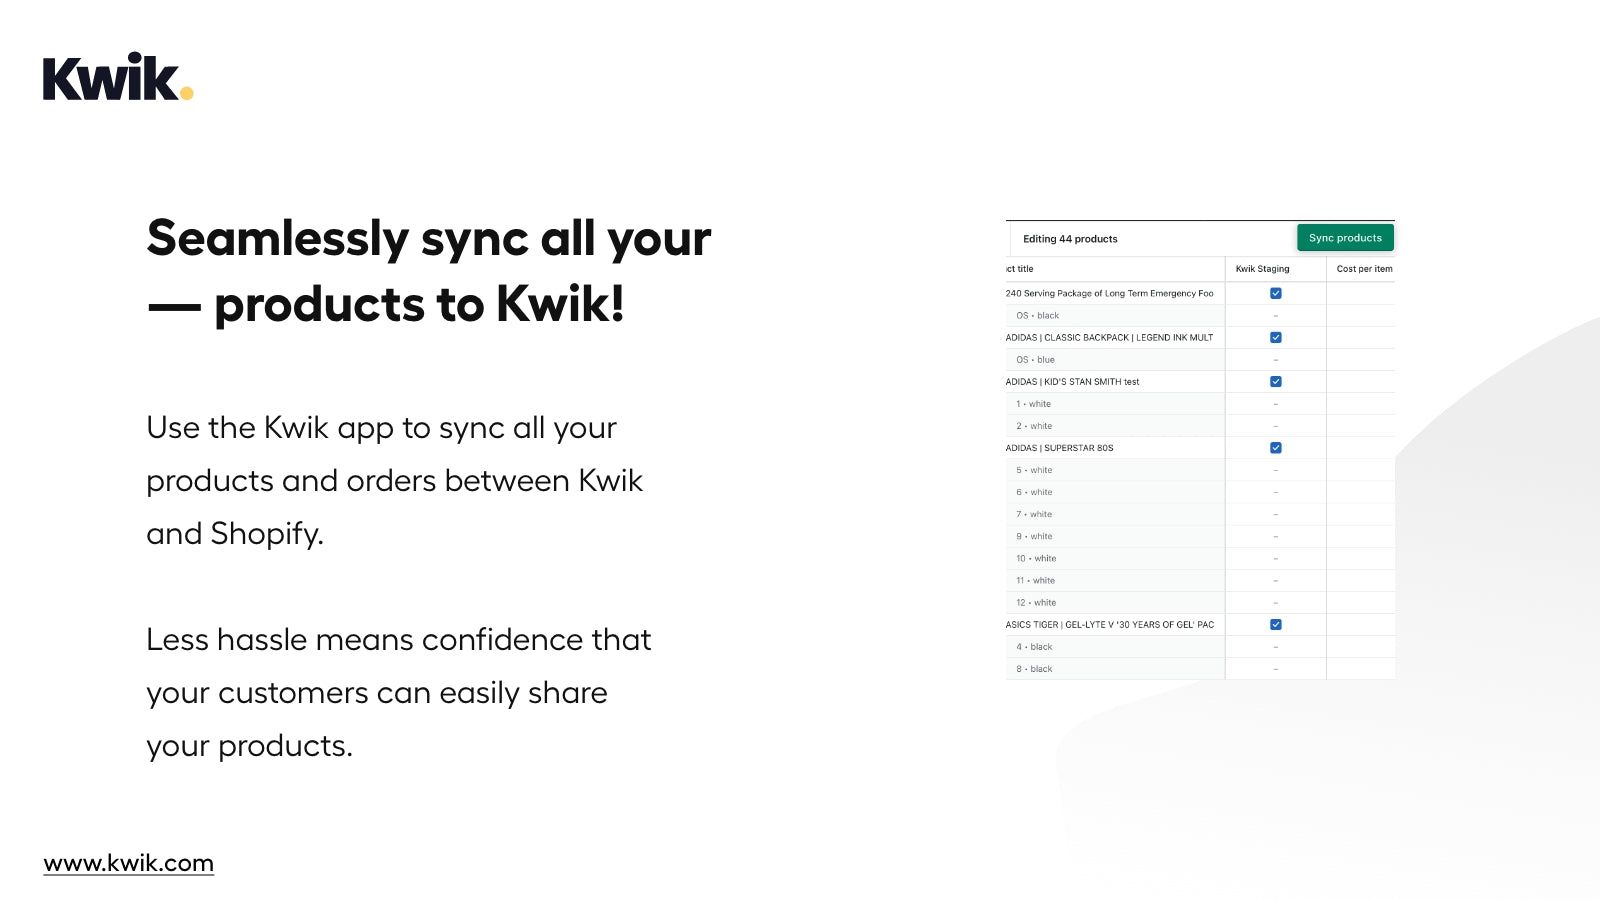 Seamlessly sync all your products to Kwik